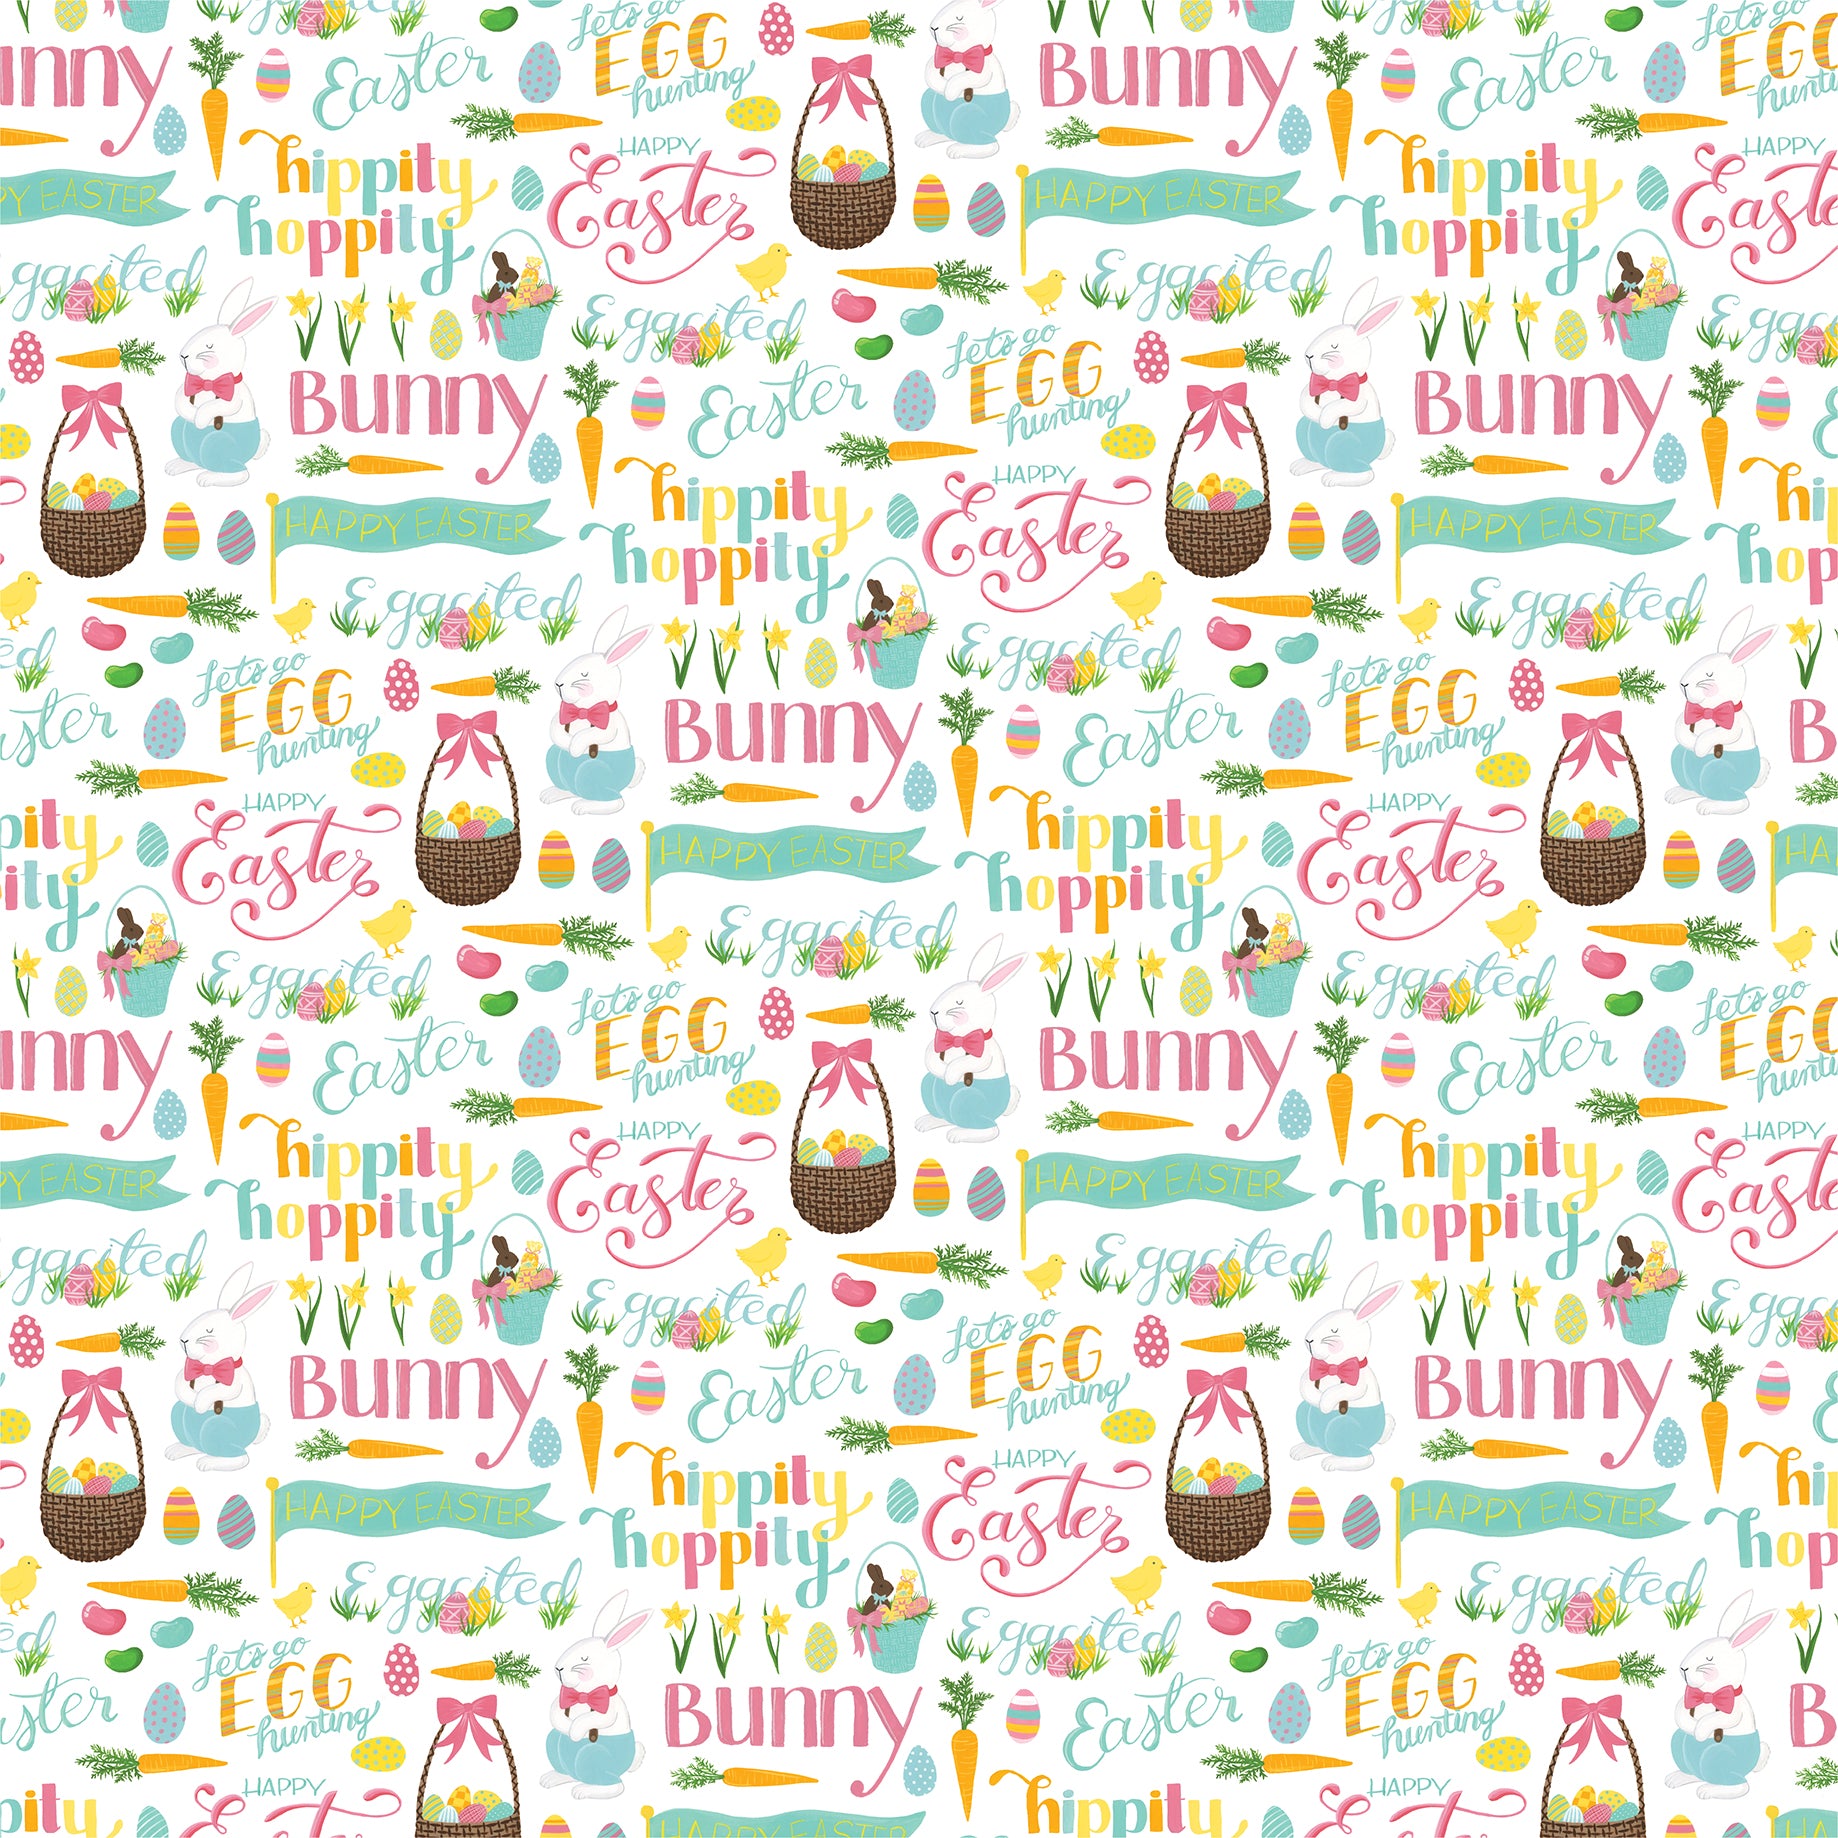 I Love Easter Collection Easter Basket 12 x 12 Double-Sided Scrapbook Paper by Echo Park Paper